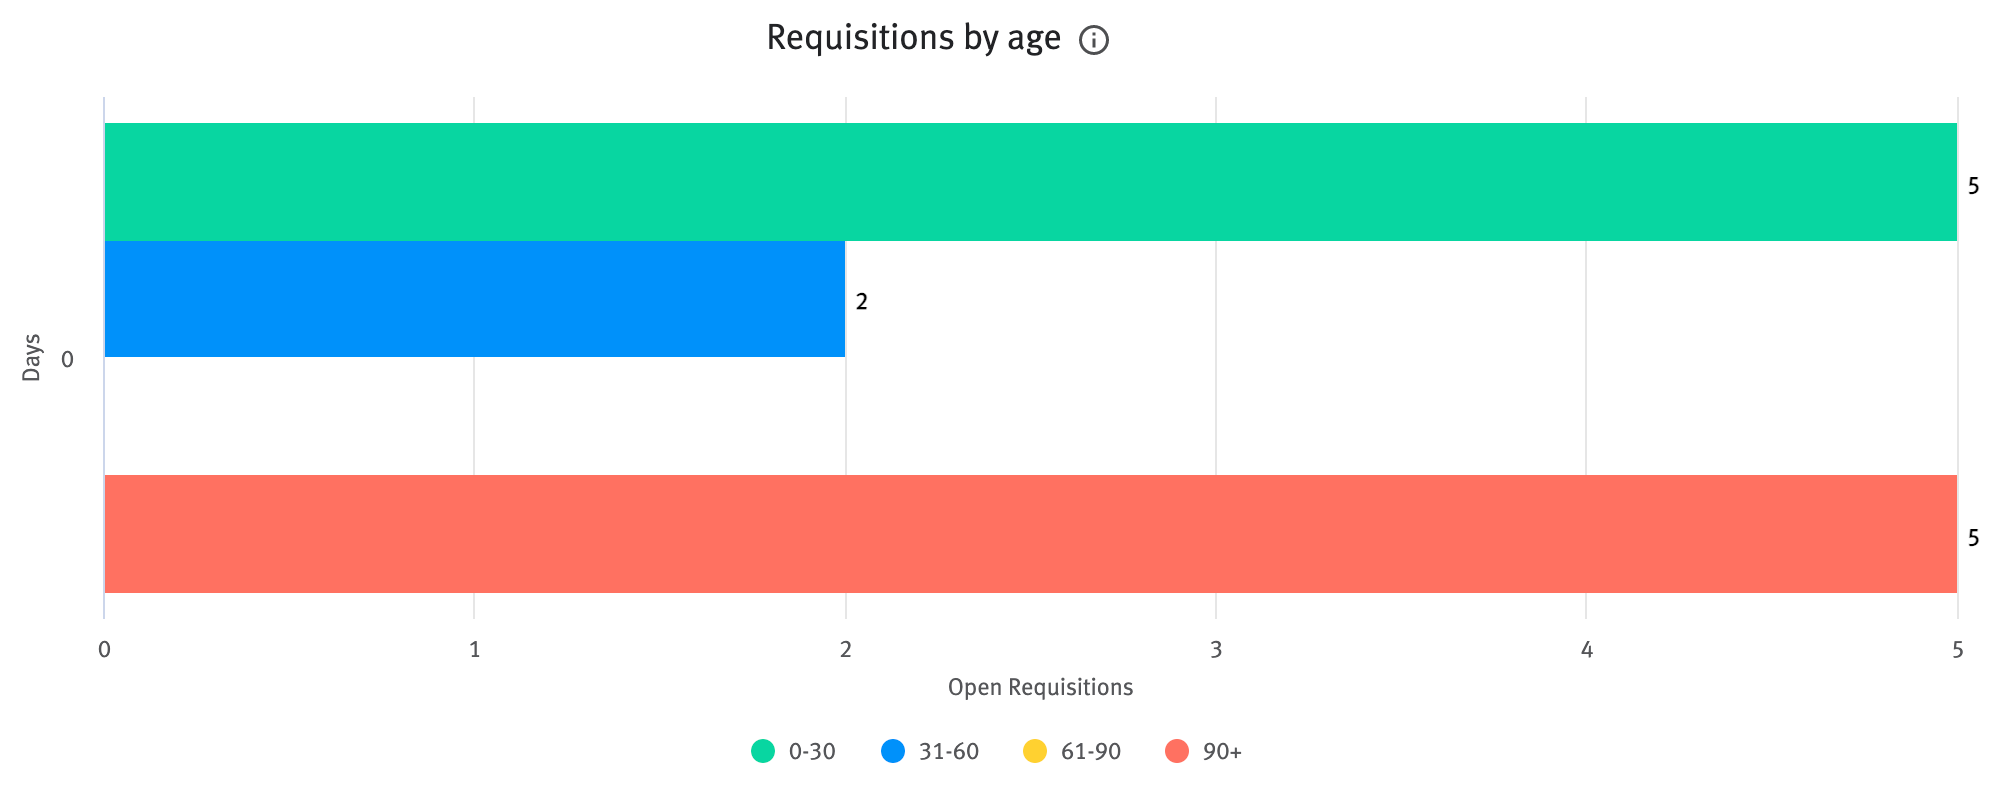 Requisitions by age chart